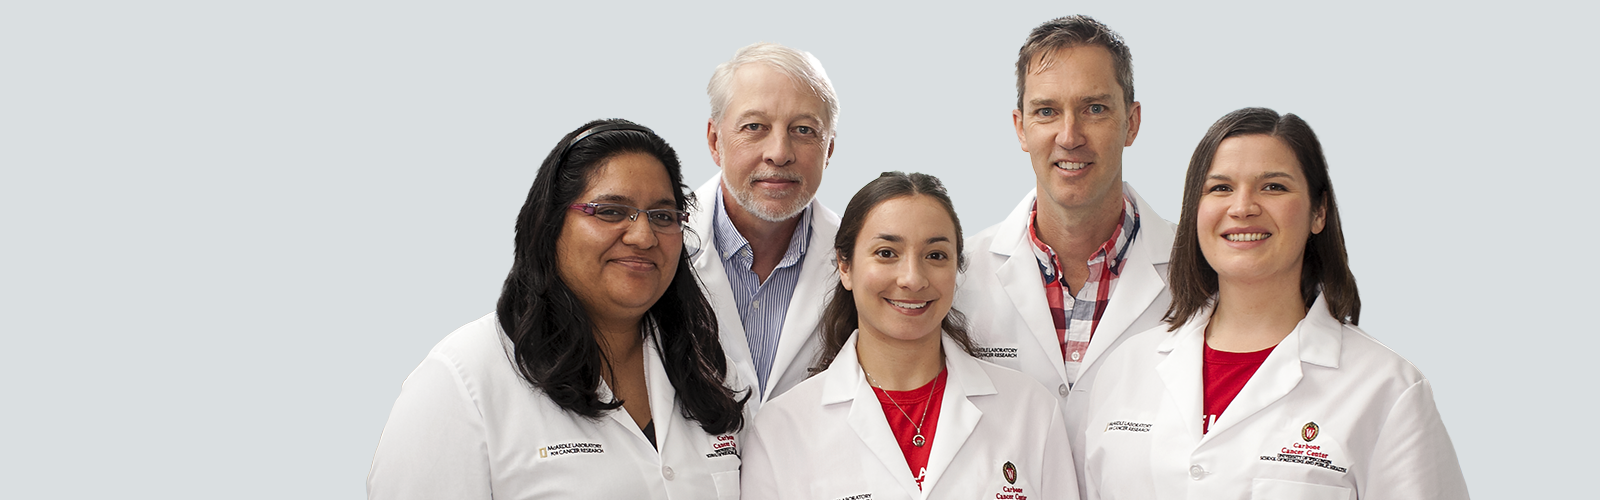 Five UW Health physicians in their lab coats posing for the camera.